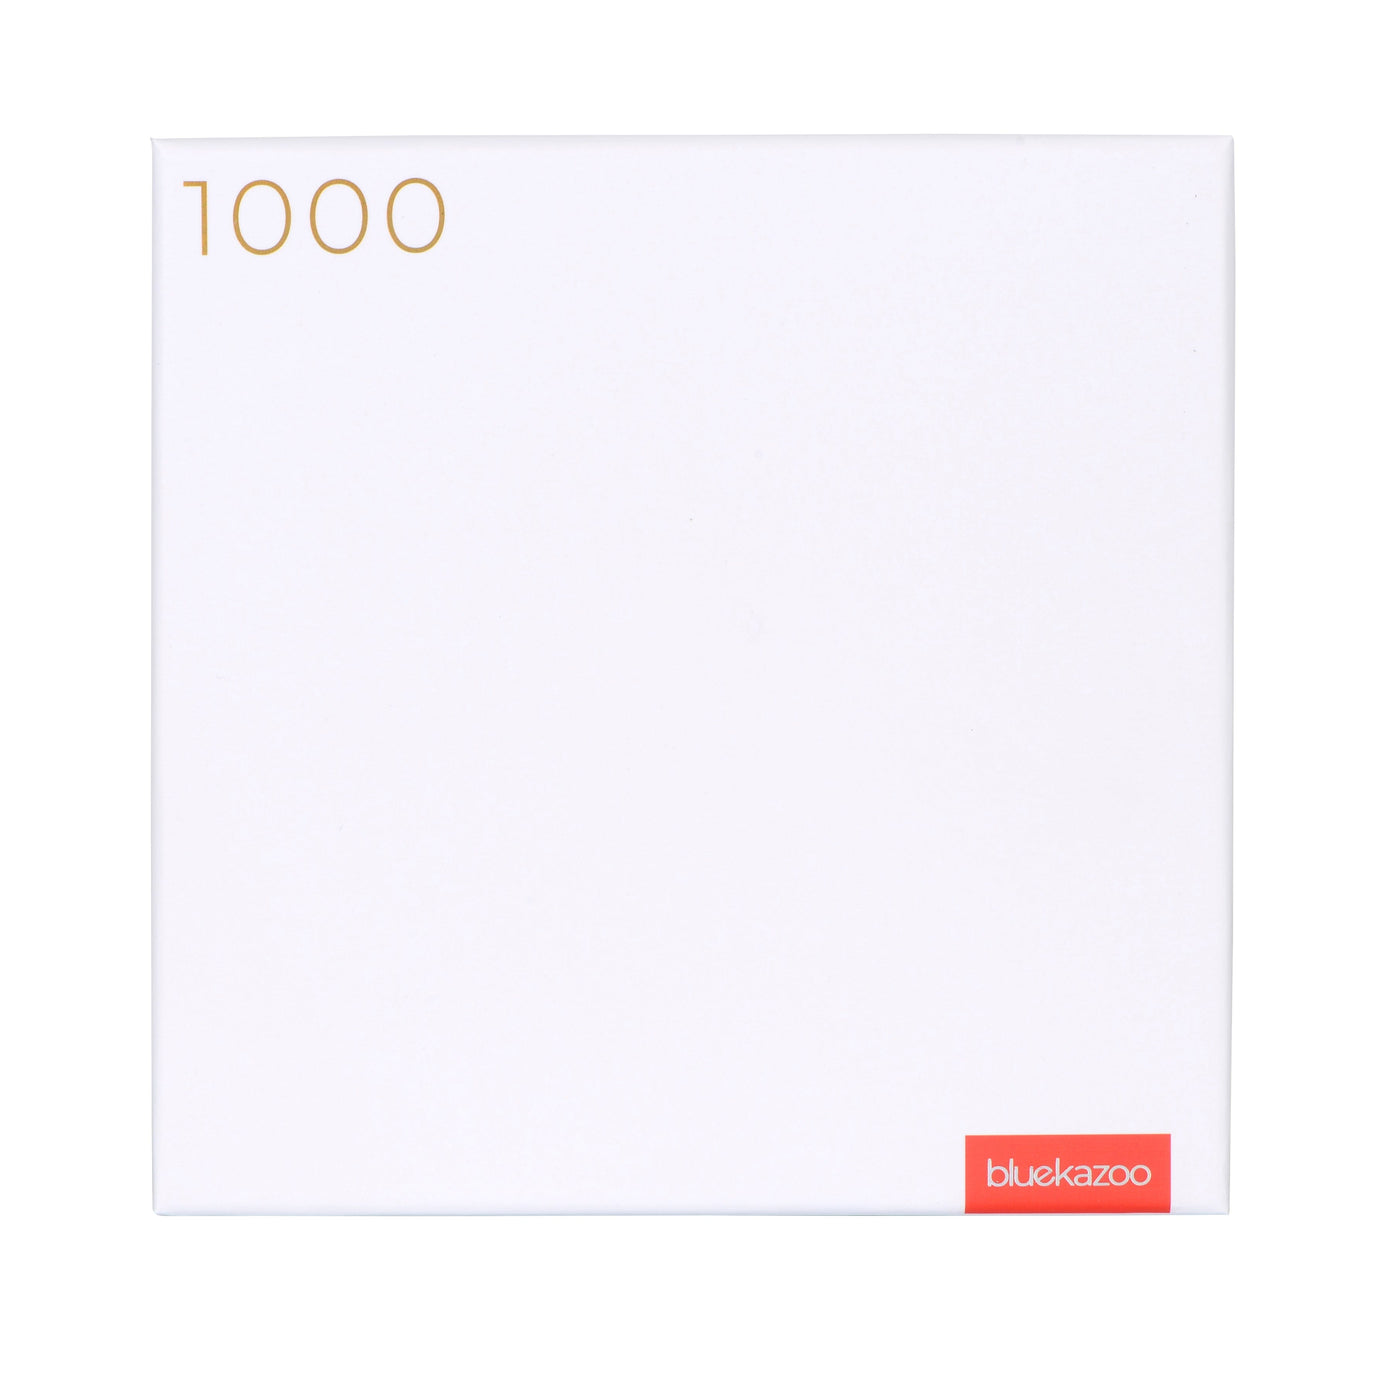 IMPOSSIBLE: WHITE | 250 Piece Jigsaw Puzzle